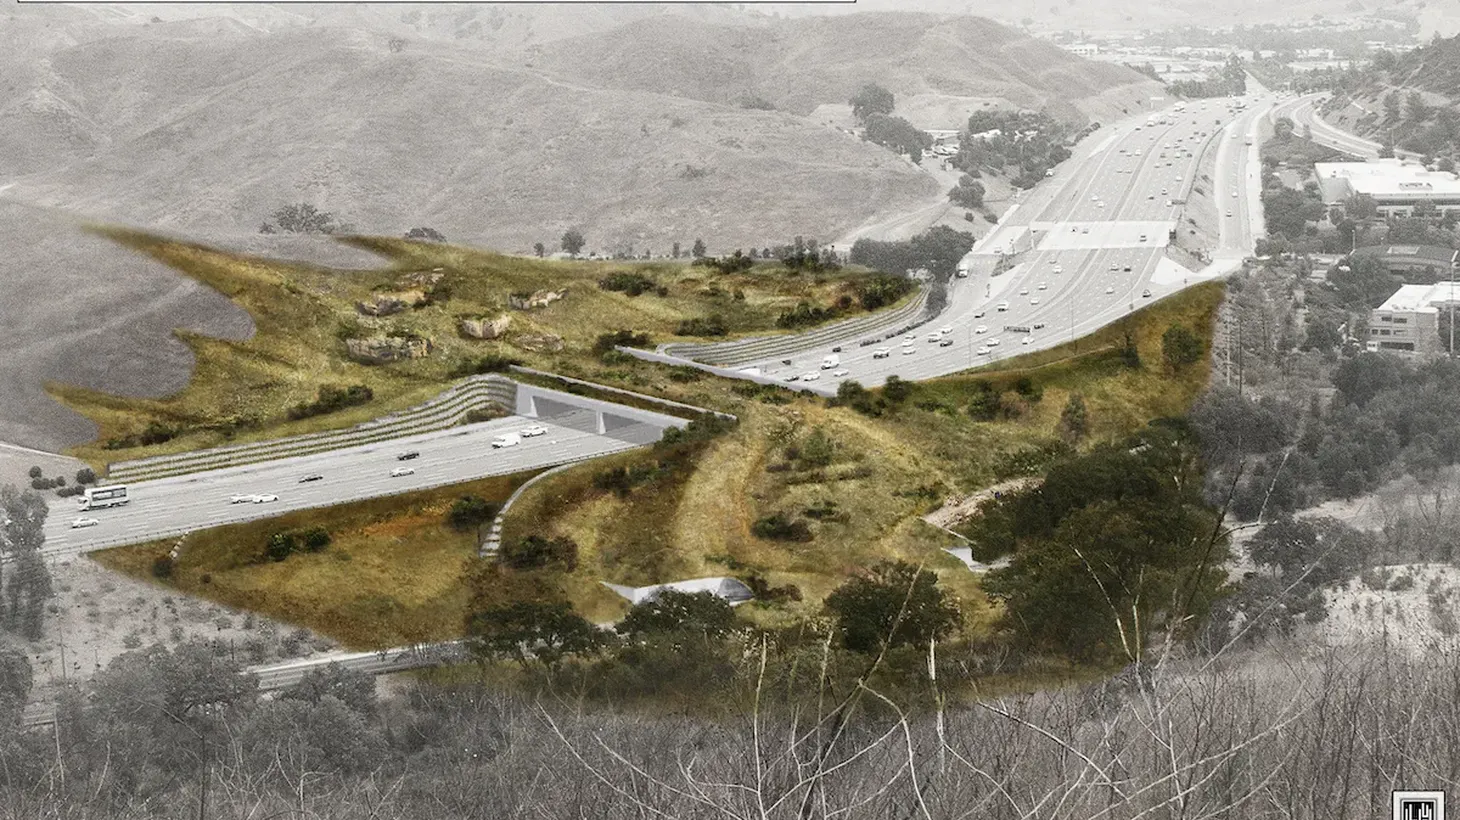 “This is being designed for everything from monarch butterflies to mountain lions. It really is a whole scale solution to reconnecting that Santa Monica Mountains ecosystem to the rest of the world,” says Beth Pratt-Bergstrom, California director for the National Wildlife Federation.